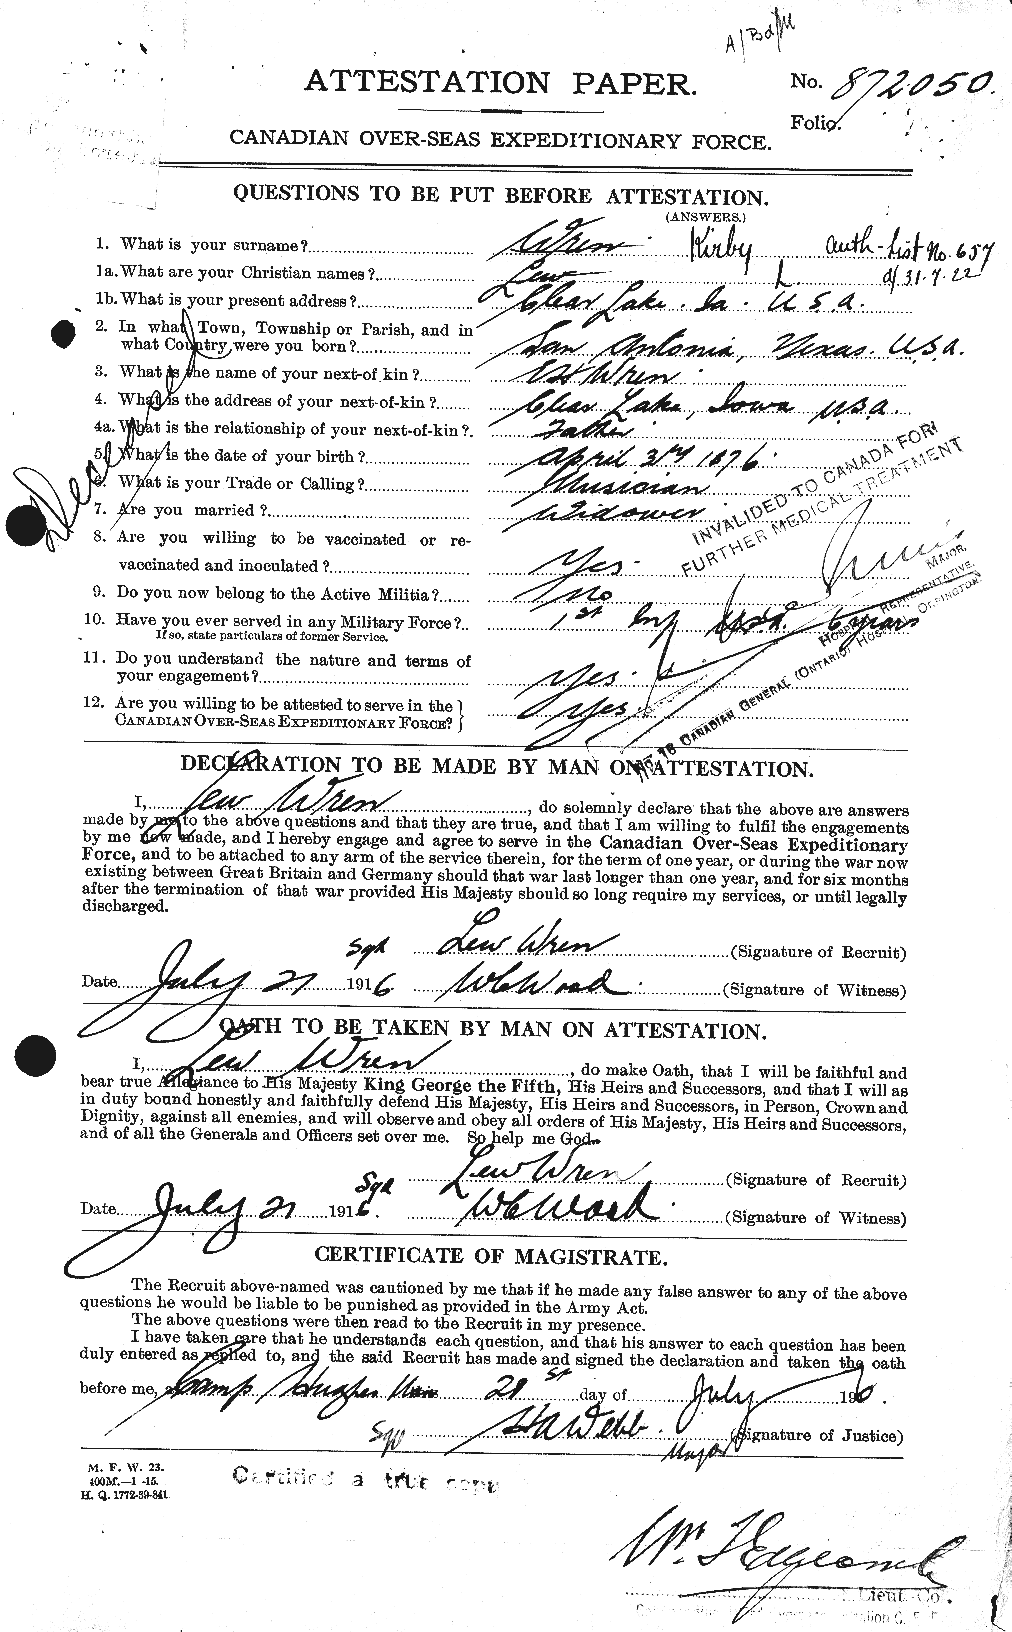 Personnel Records of the First World War - CEF 687587a